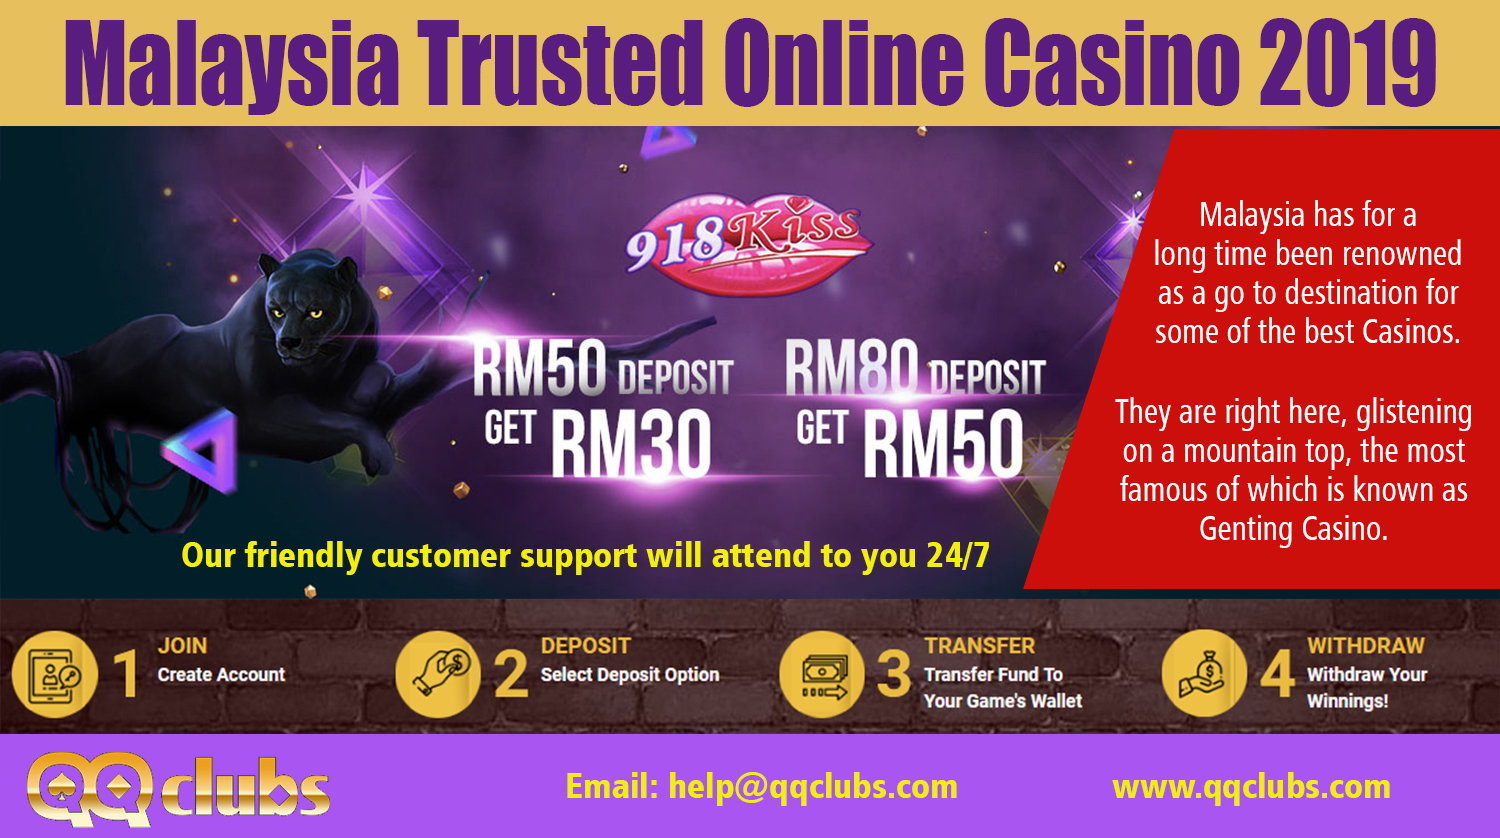 online casino malaysia 2019 for android vbulletin